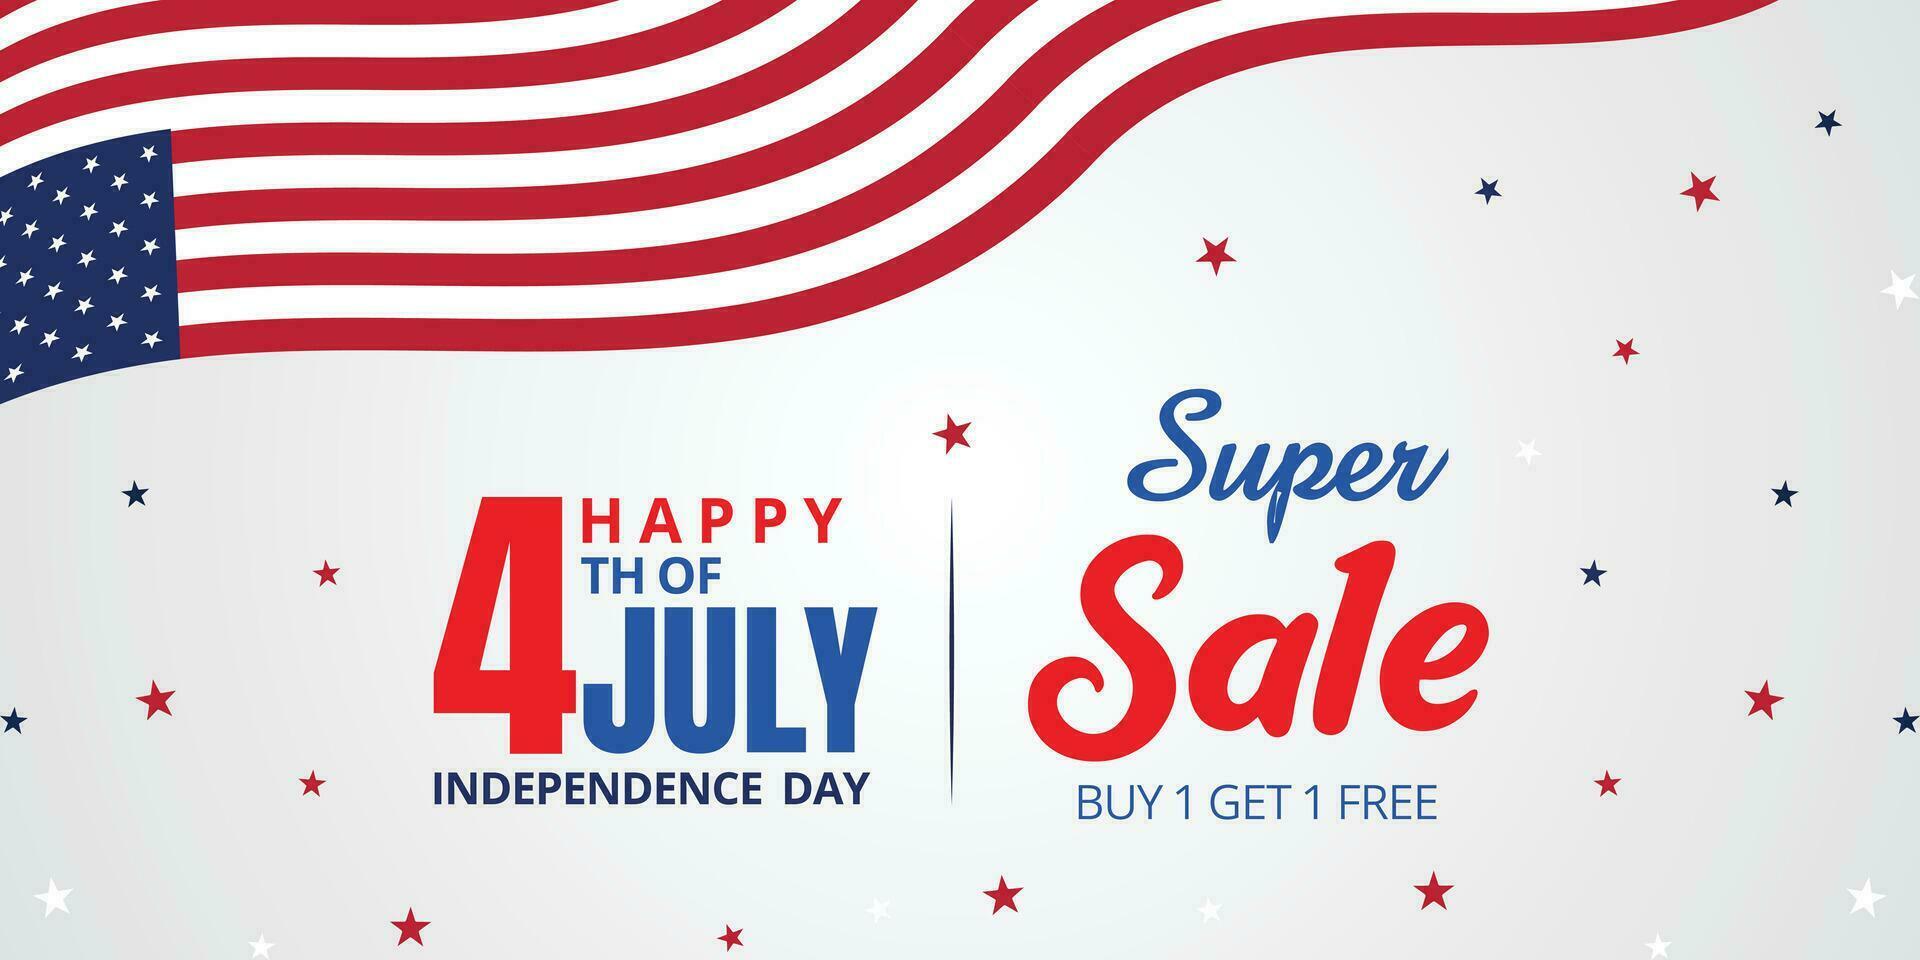 When is Independence Day in the USA Sale?